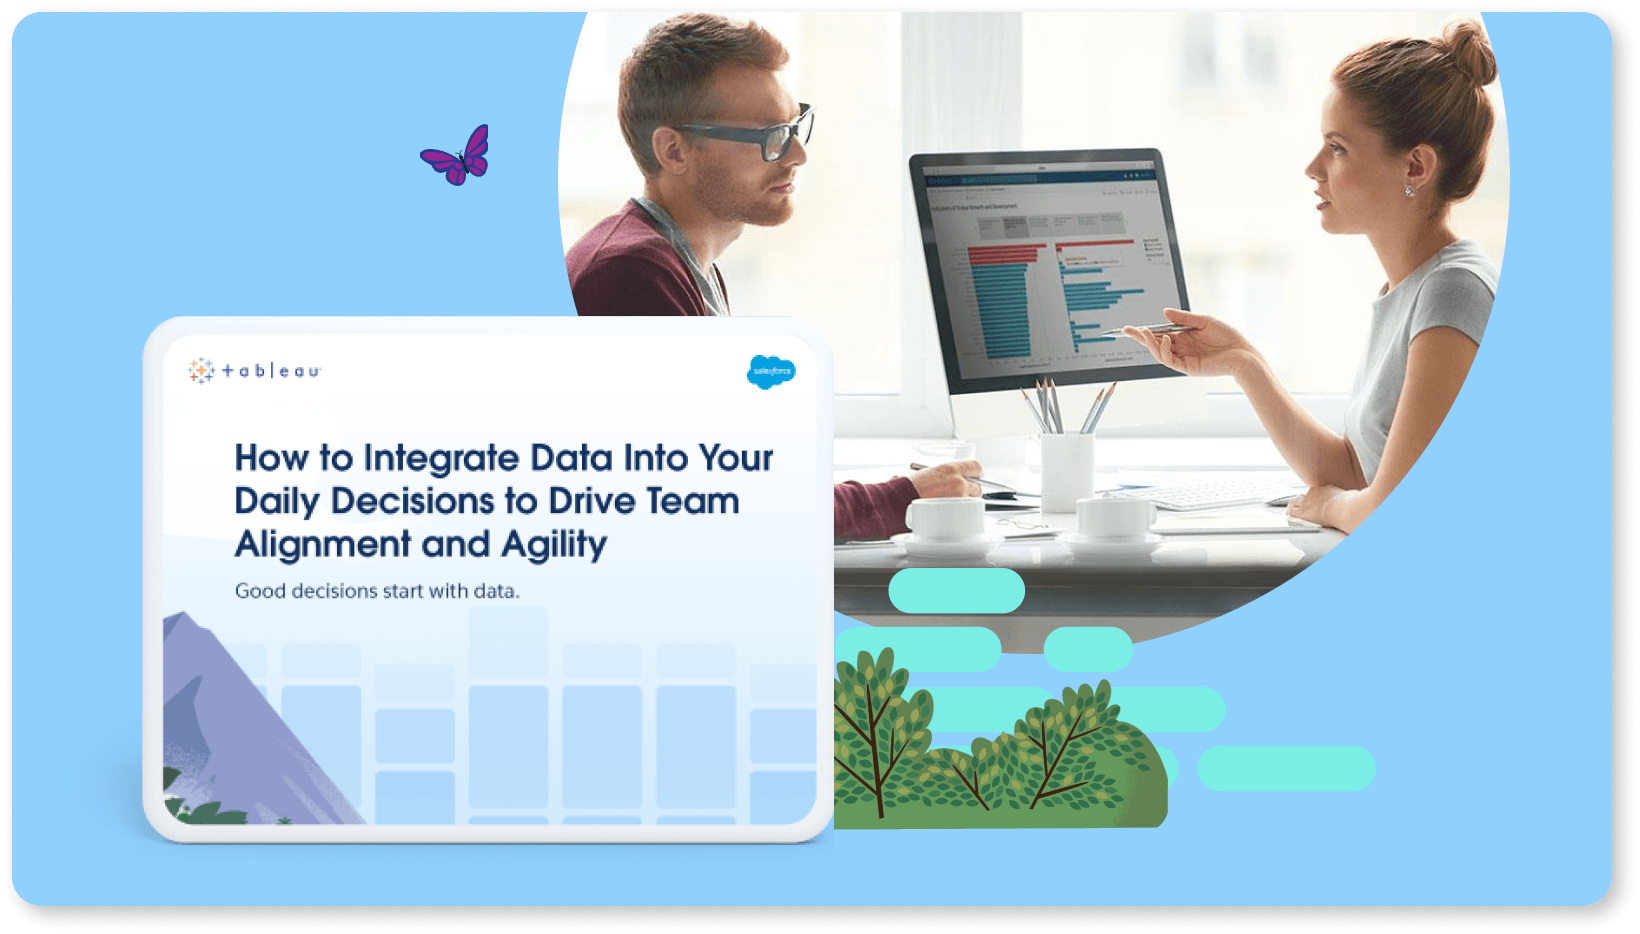 Passa a How to Integrate Data Into Your Daily Decisions to Drive Team Alignment and Agility